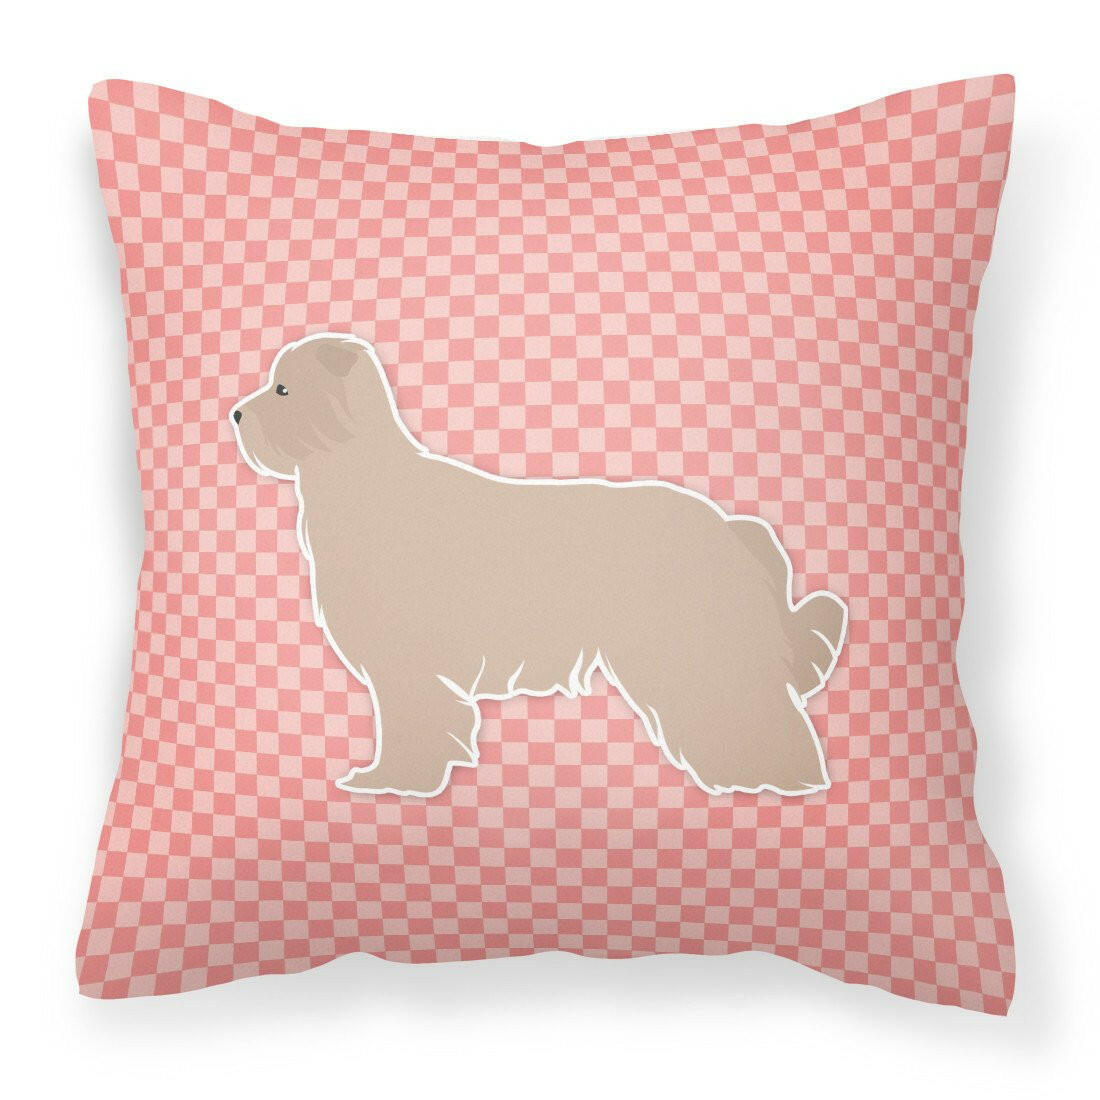 Pyrenean Shepherd Checkerboard Pink Fabric Decorative Pillow BB3618PW1818 by Caroline's Treasures